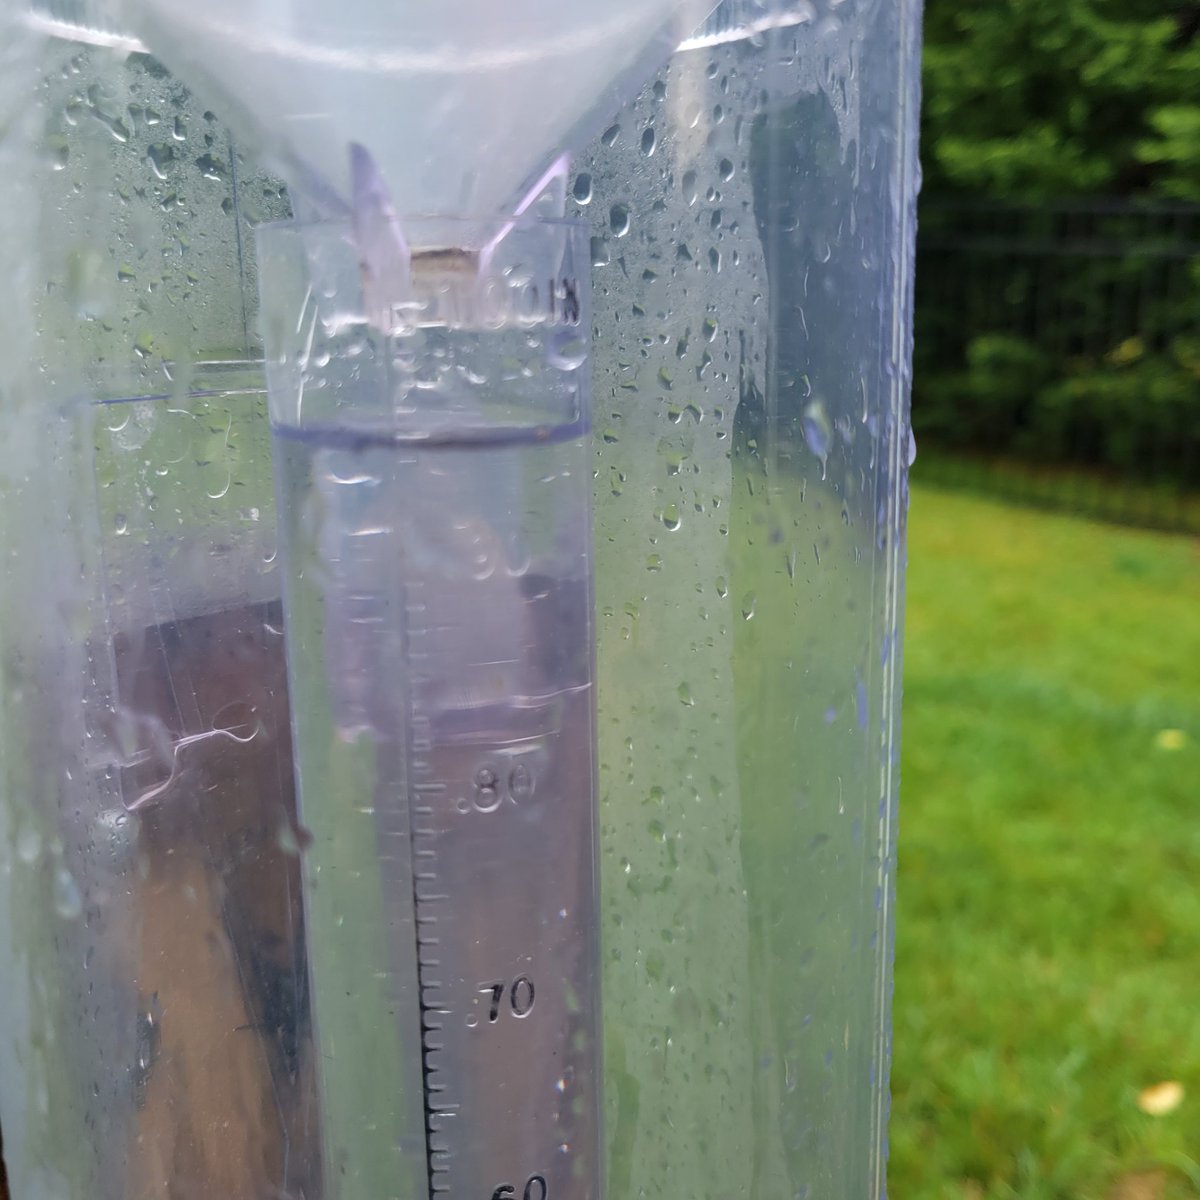 Add another 0.94' to the gauge from storms yesterday in Columbus, NJ. #njwx #summertime ⛈️⛈️⛈️
@nynjpaweather @NWS_MountHolly @mcadehaven @oxlamb @ACPressMartucci